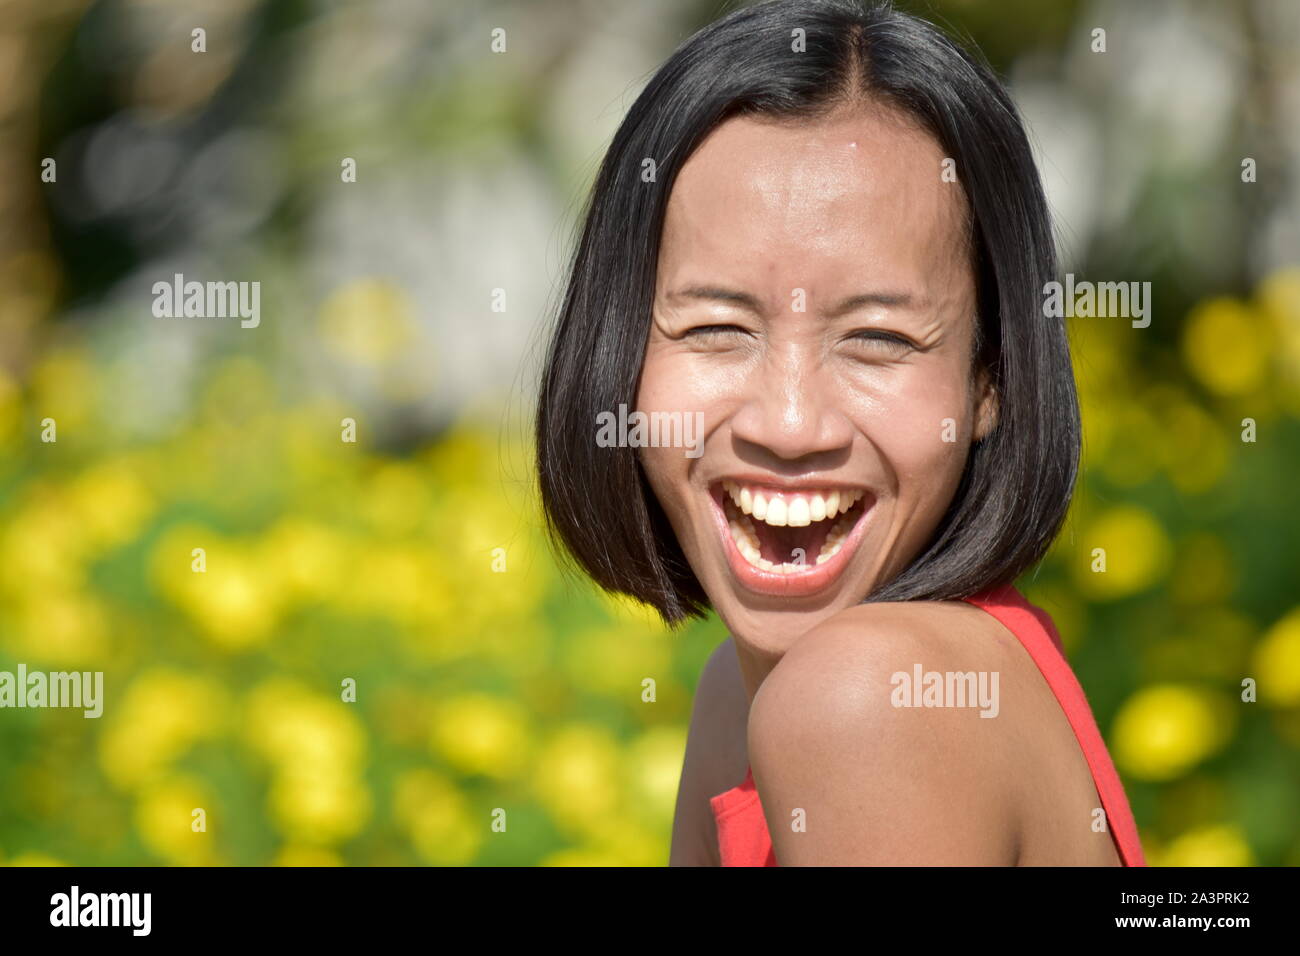 An Adult Female Laughing Stock Photo